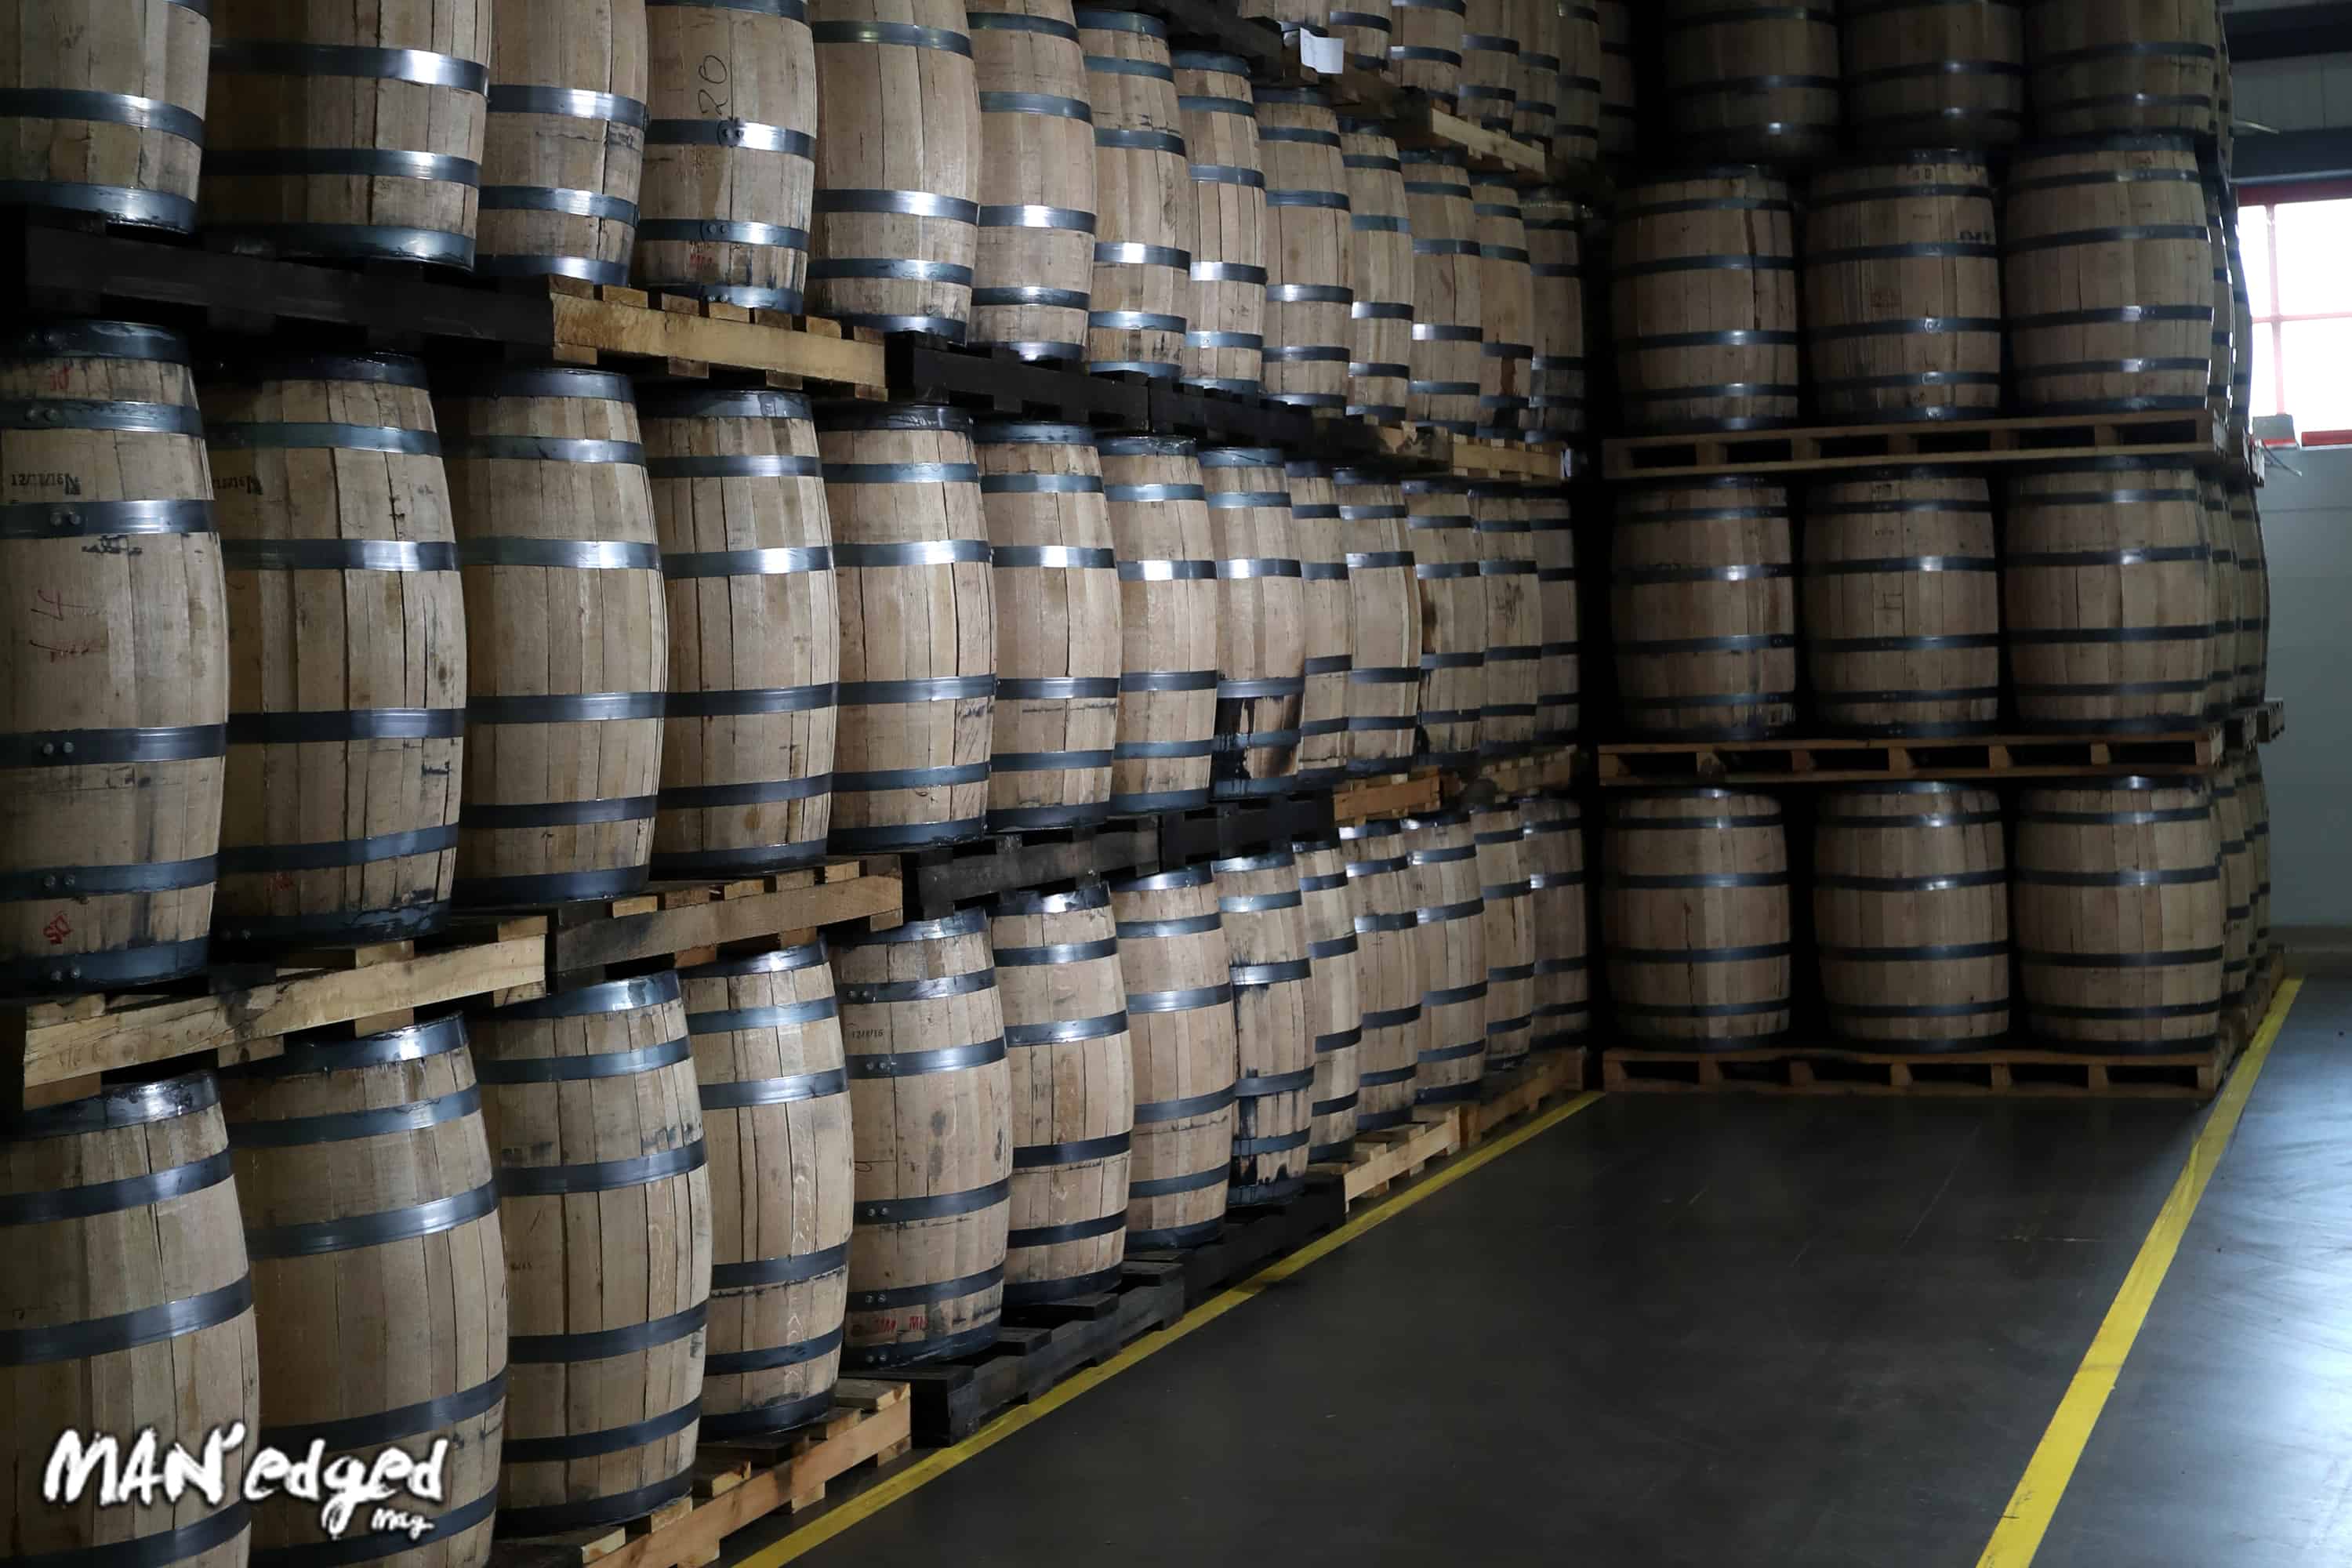 Whiskey and bourbon barrels at Bulleit's new distillery in Kentucky